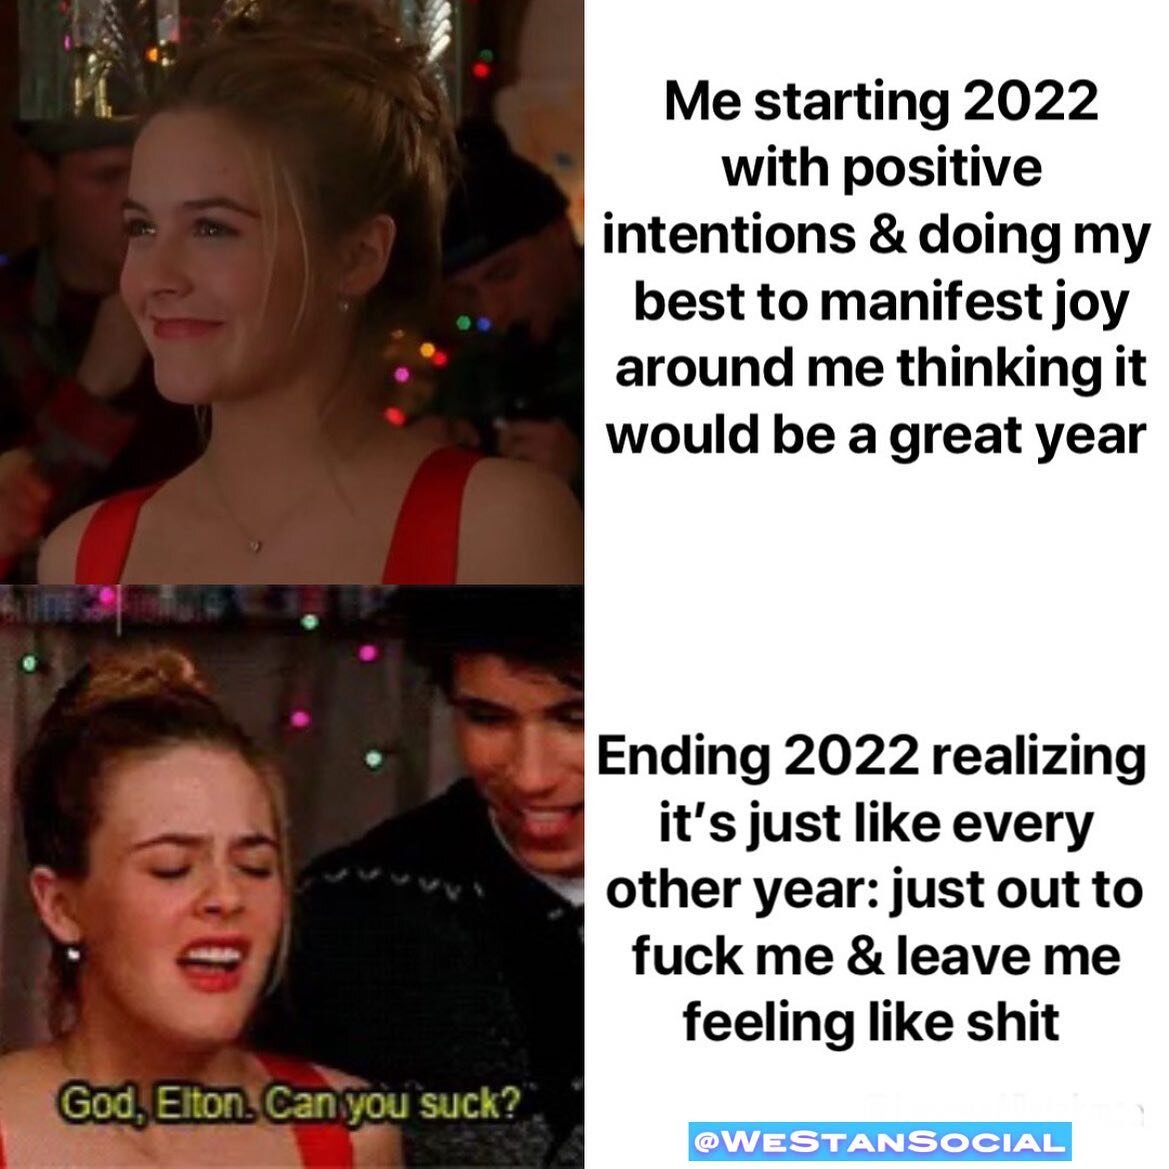 Anyone else ready for 2022 to GTFO?